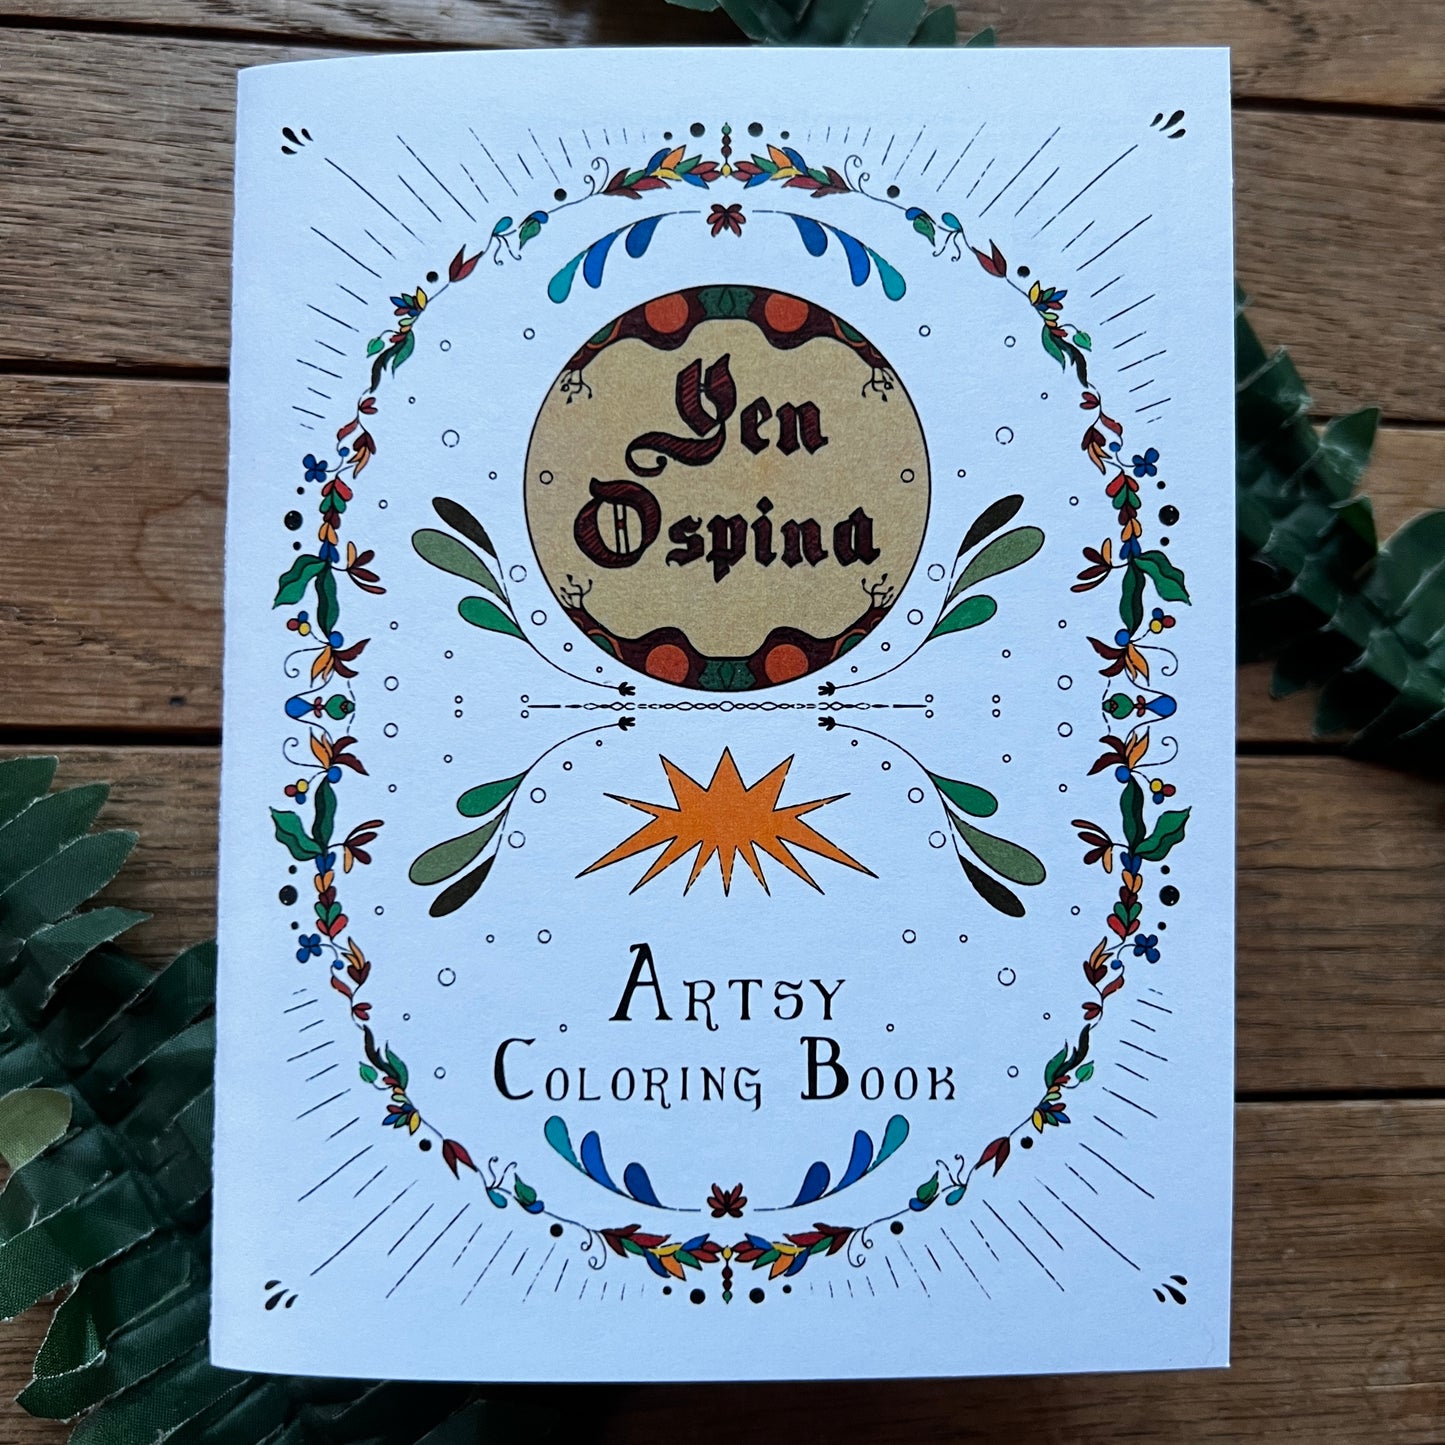 1st Edition "Artsy Coloring Book" by Yen Ospina